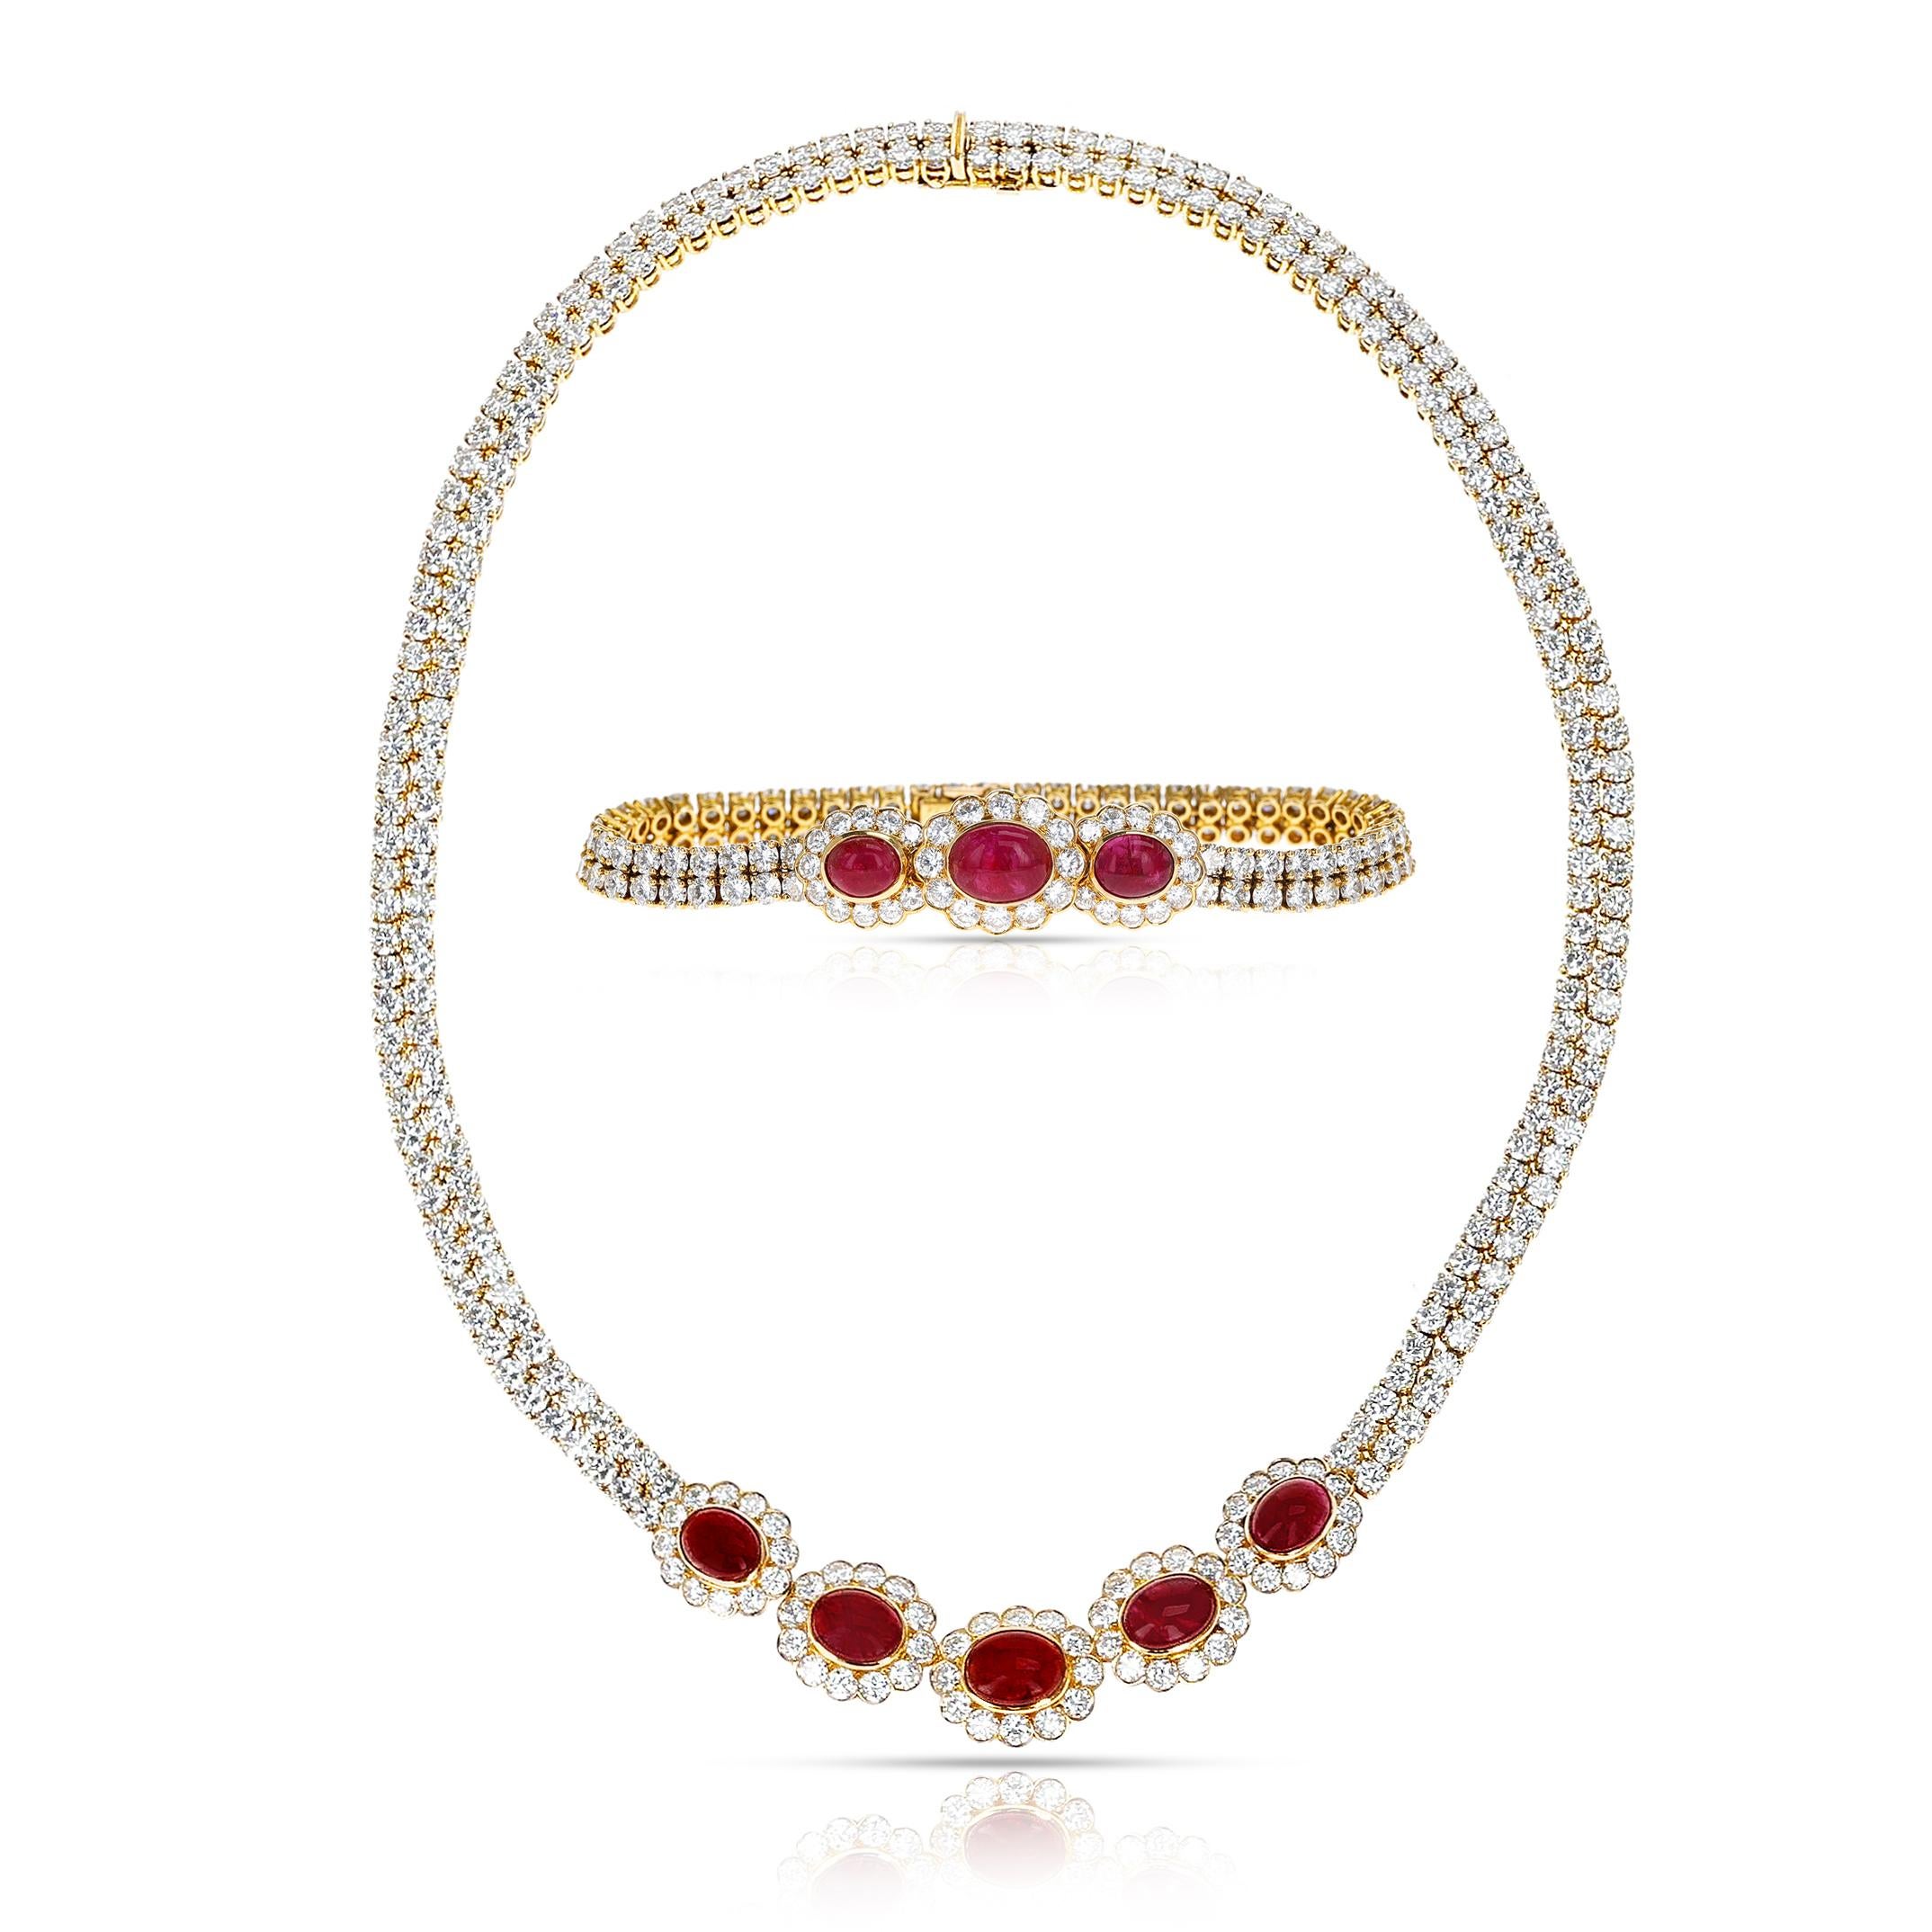 Van Cleef & Arpels Ruby Cabochon and Diamond Bracelet and Necklace Set, 18k For Sale 2